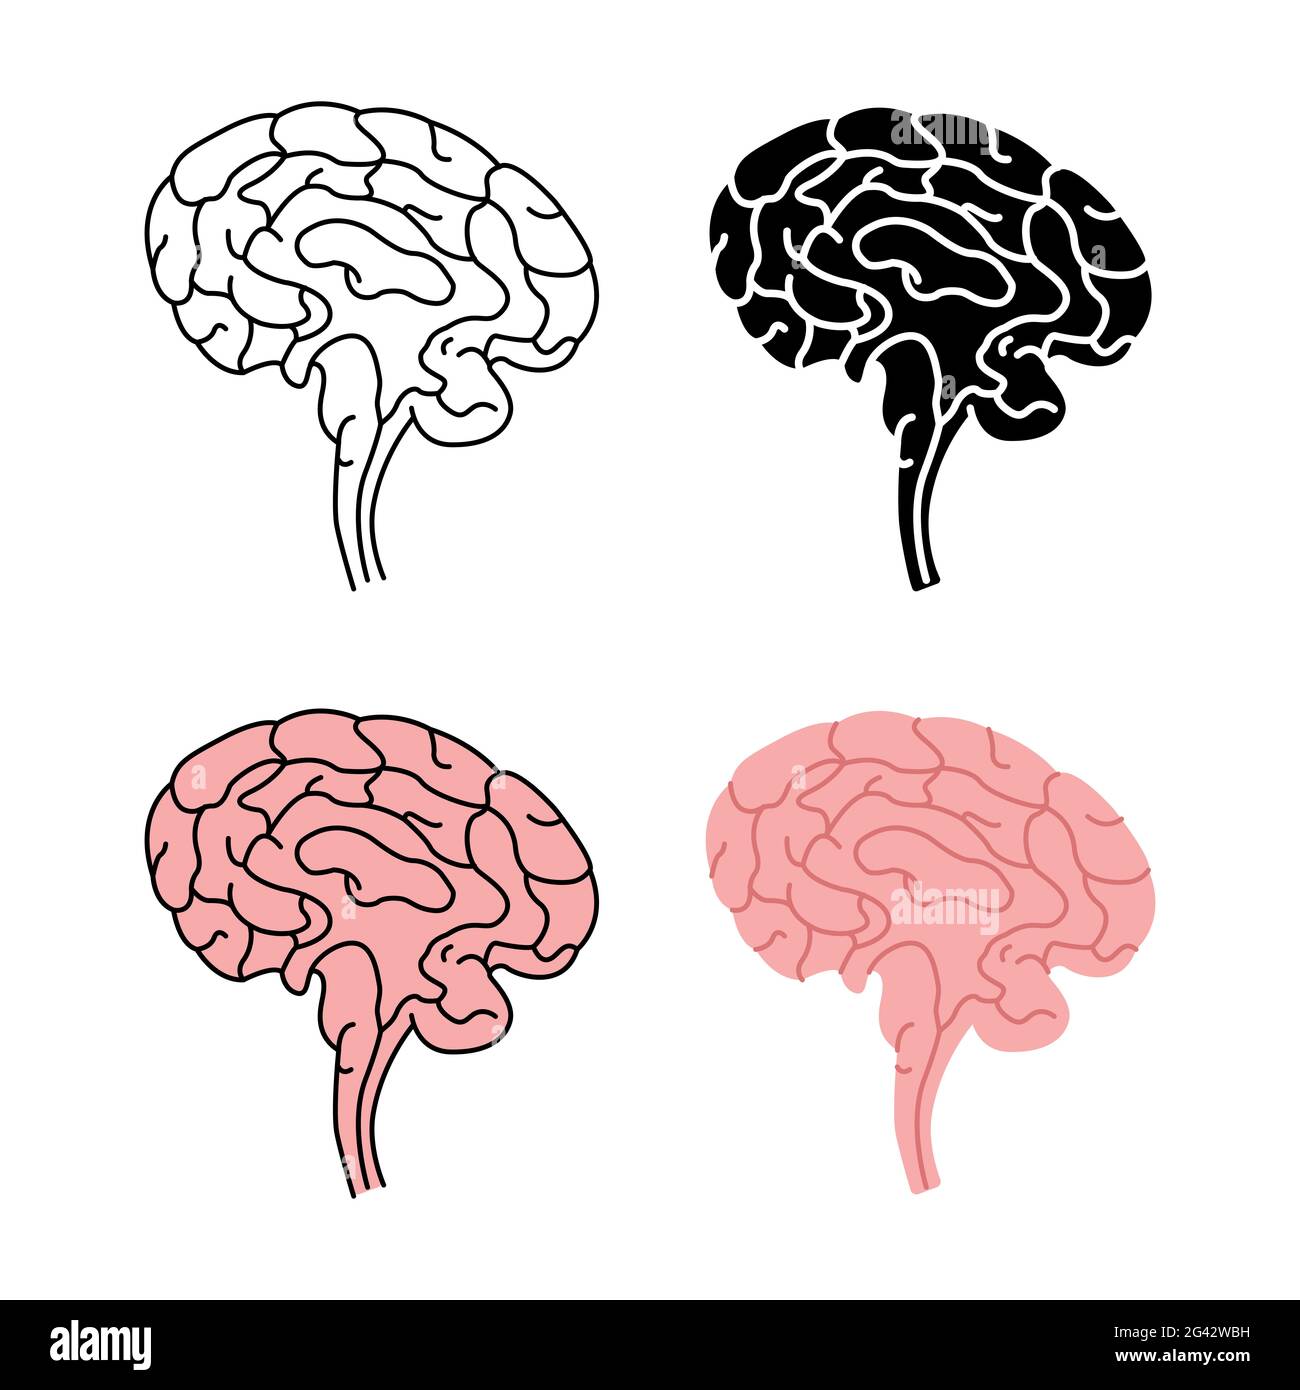 Healthy human brain side view vector illustration isolated on white background Stock Photo